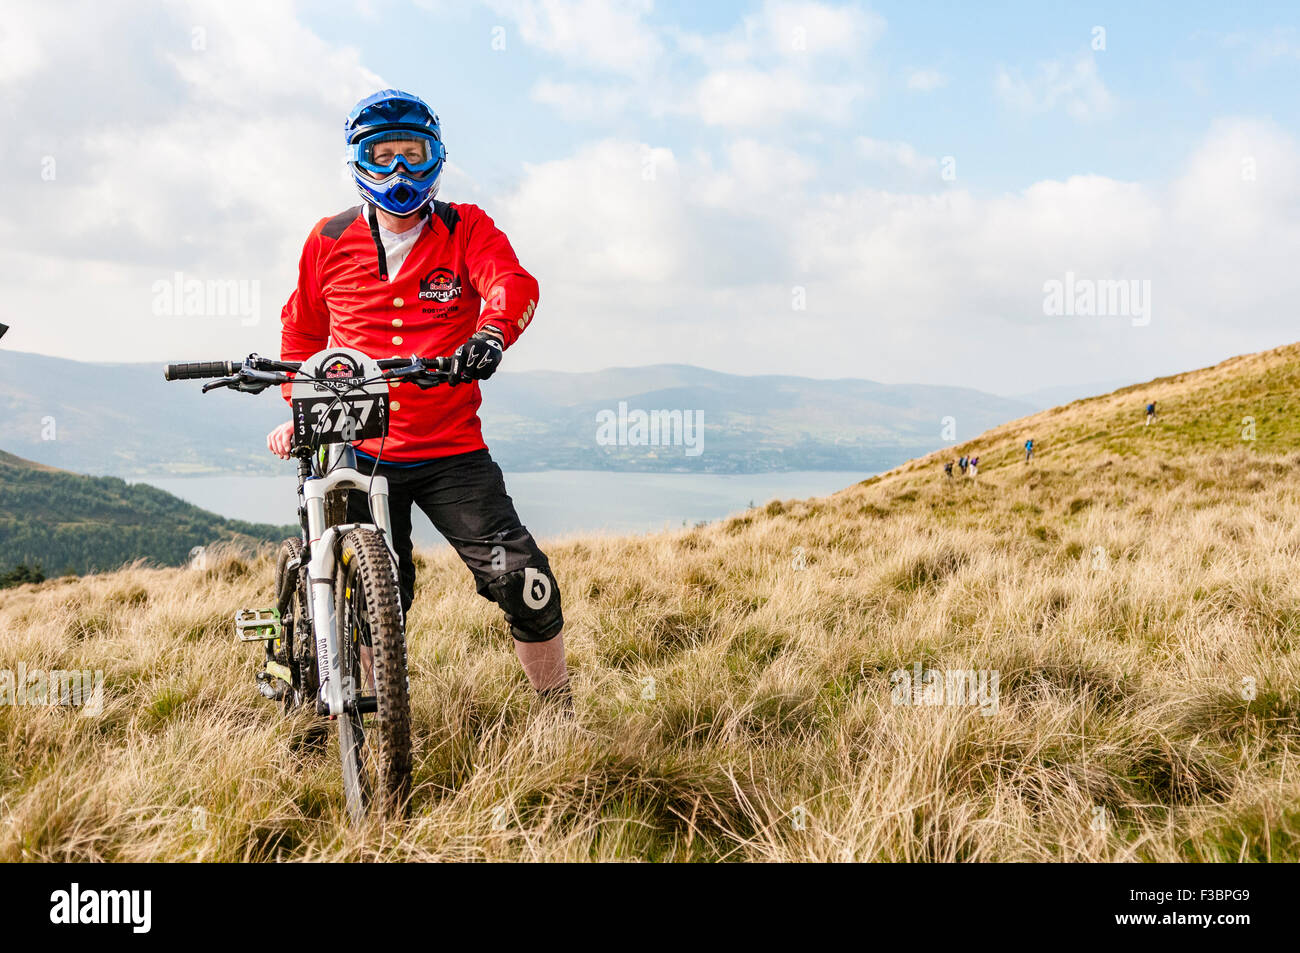 Rostrevor, Northern Ireland. 04 Oct 2015 - A competitor on the top of Slieve Martin at the start of the Redbull Foxhunt mountain bike downhill challenge Credit:  Stephen Barnes/Alamy Live News Stock Photo